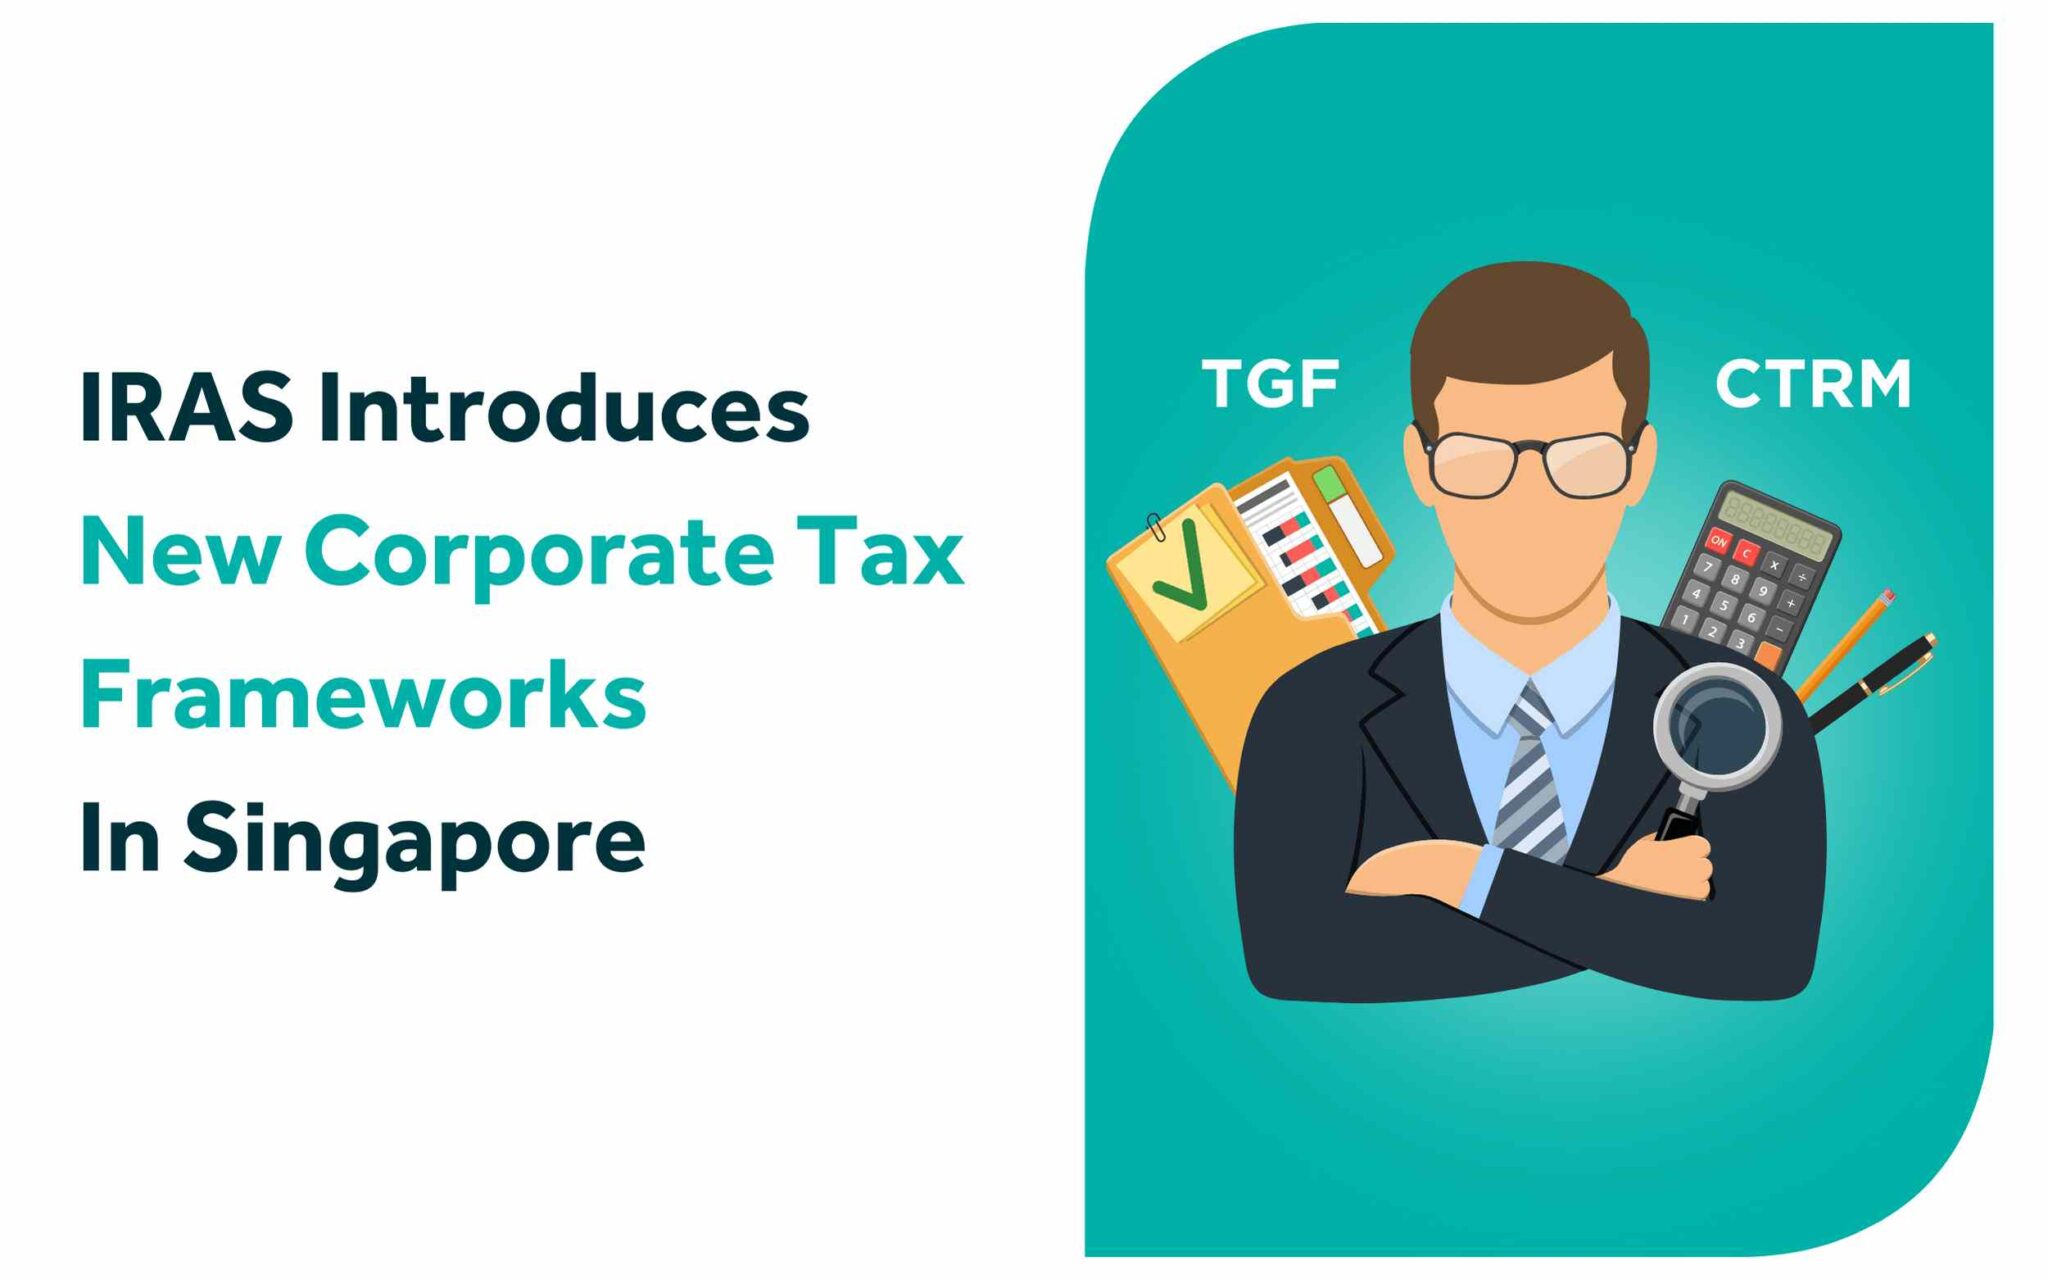 IRAS rolls out two new corporate tax frameworks in Singapore